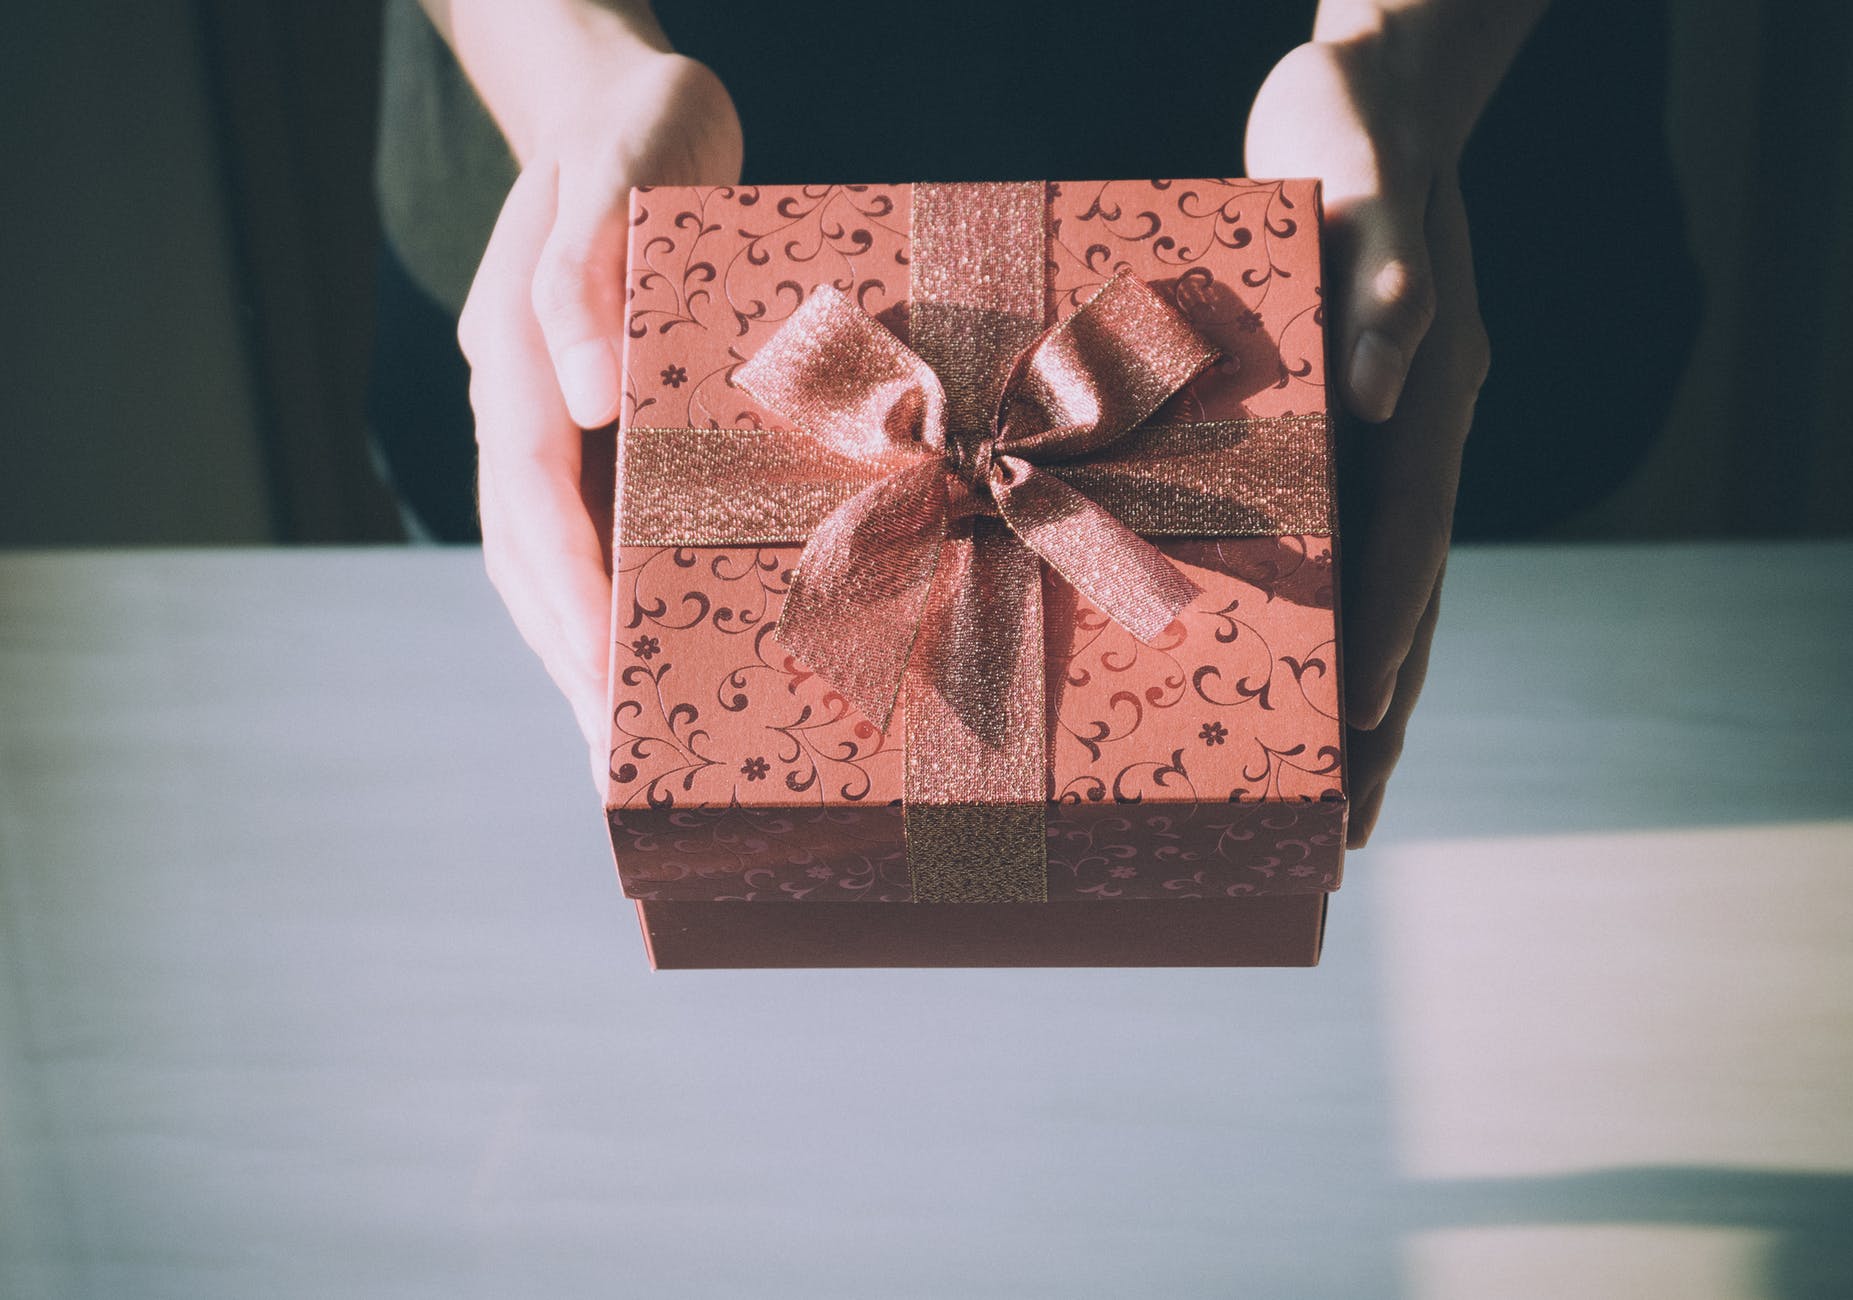 The Etiquette of Giving Gifts and How You Make Your Gift Stand Out